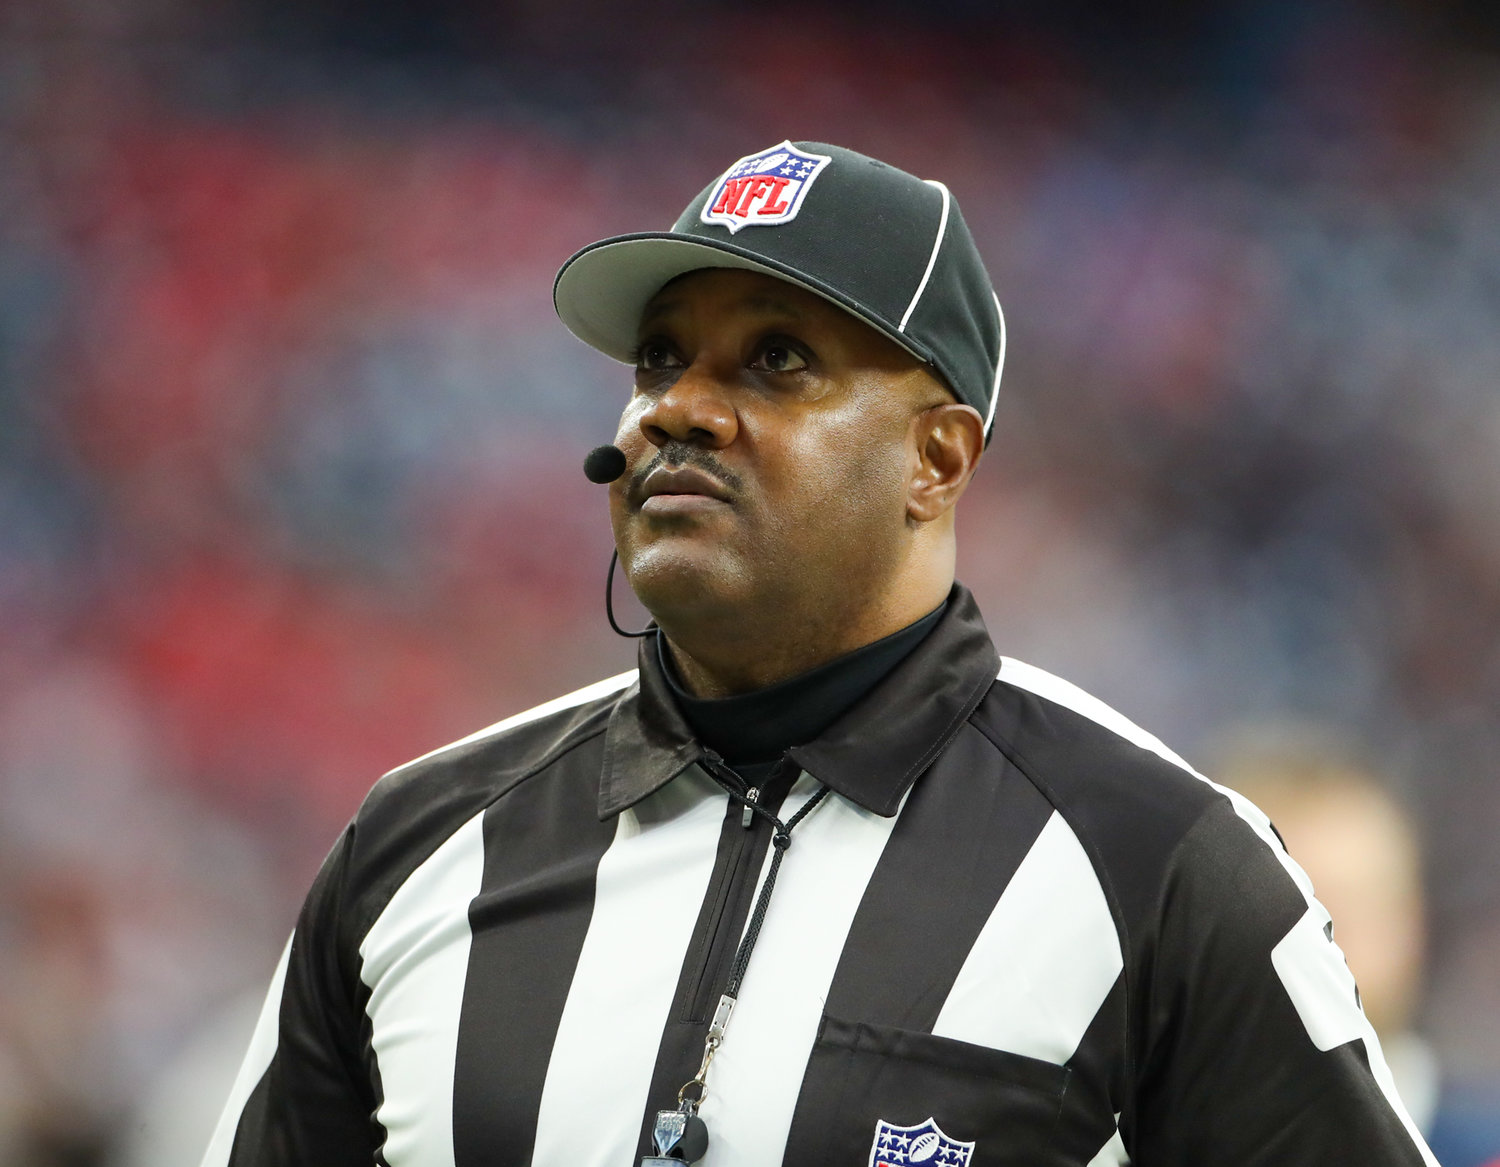 Side judge Keith Washington (7) during an NFL game between the Texans and the Colts on December 5, 2021 in Houston, Texas.